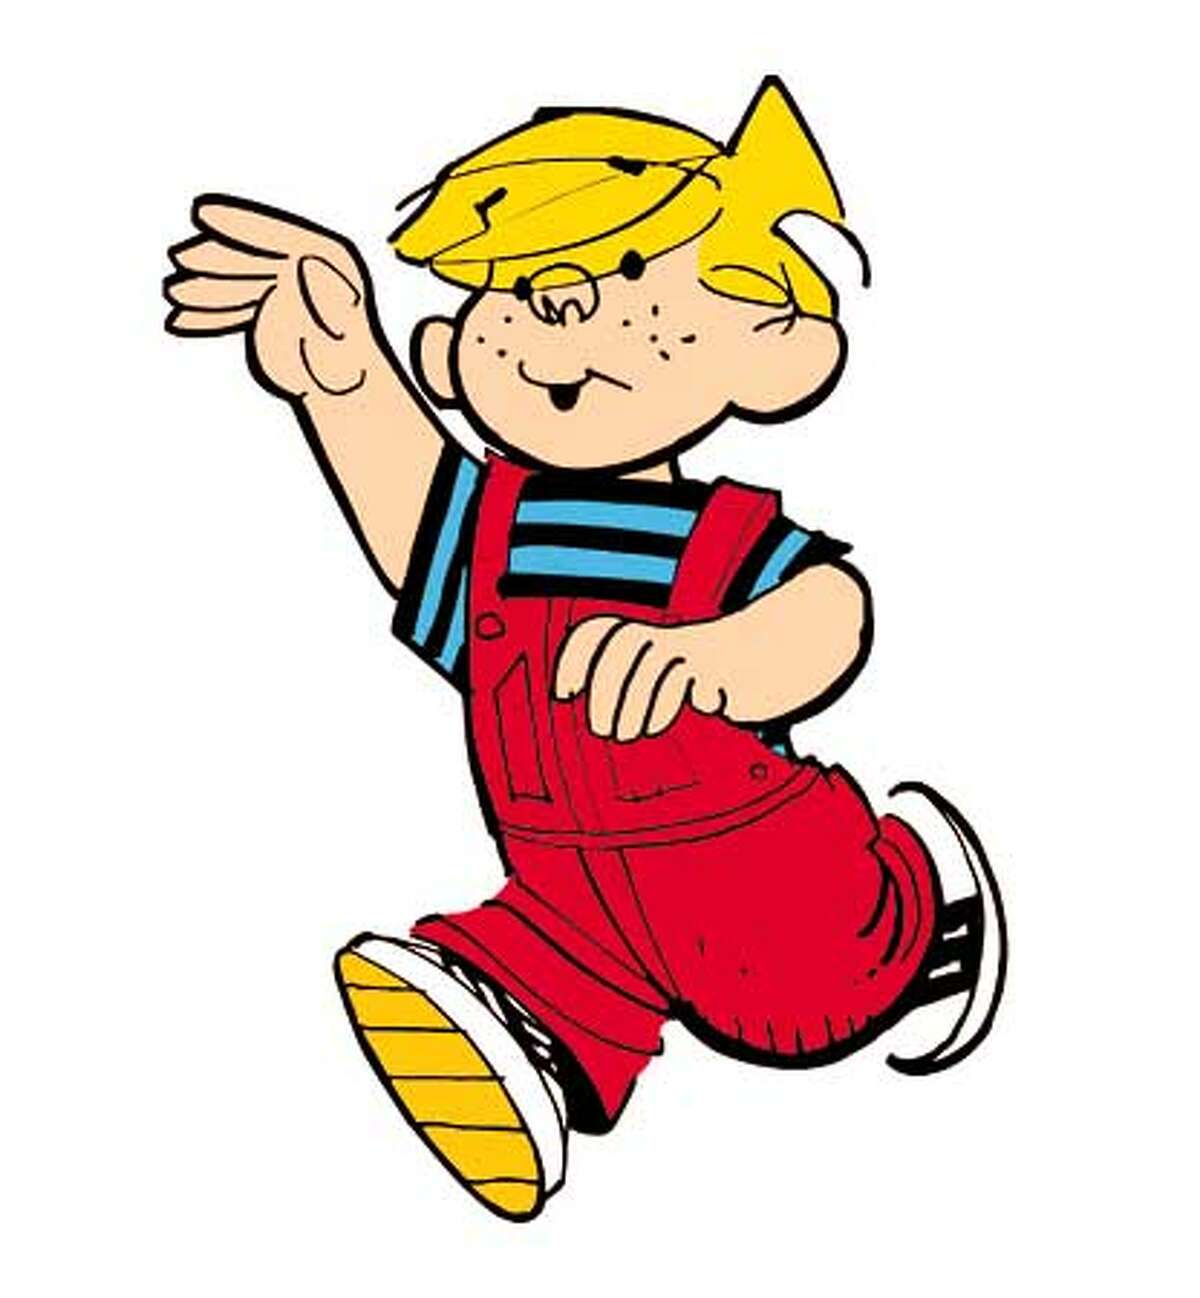 5 1/2 GOING ON 50 / His creator's slowing down, but Dennis the Menace ...